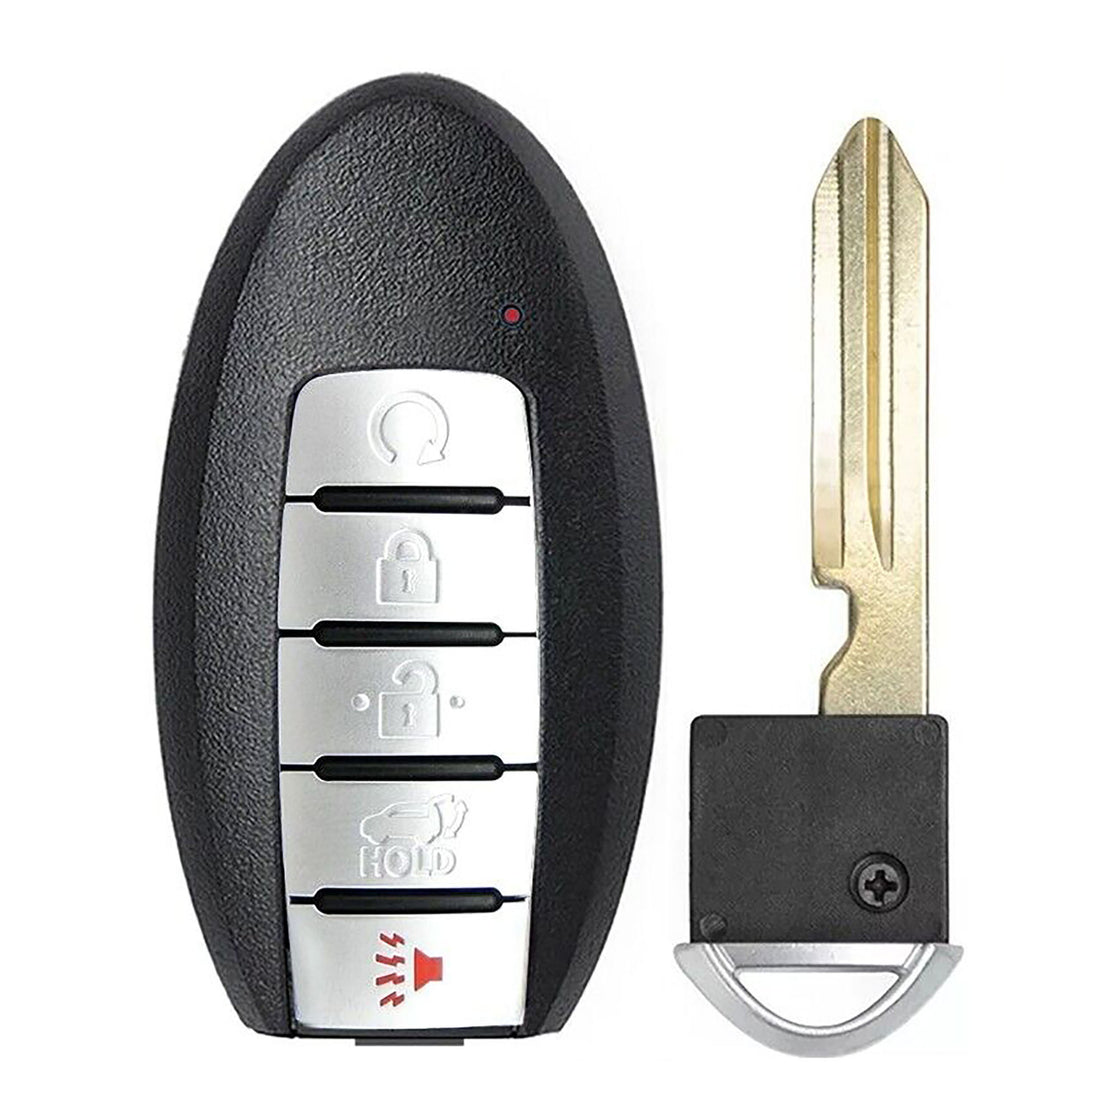 1x New Replacement Proximity Key Fob Compatible with & Fit For Nissan Vehicles (Check Fitment) - MPN KR5TXN7-08